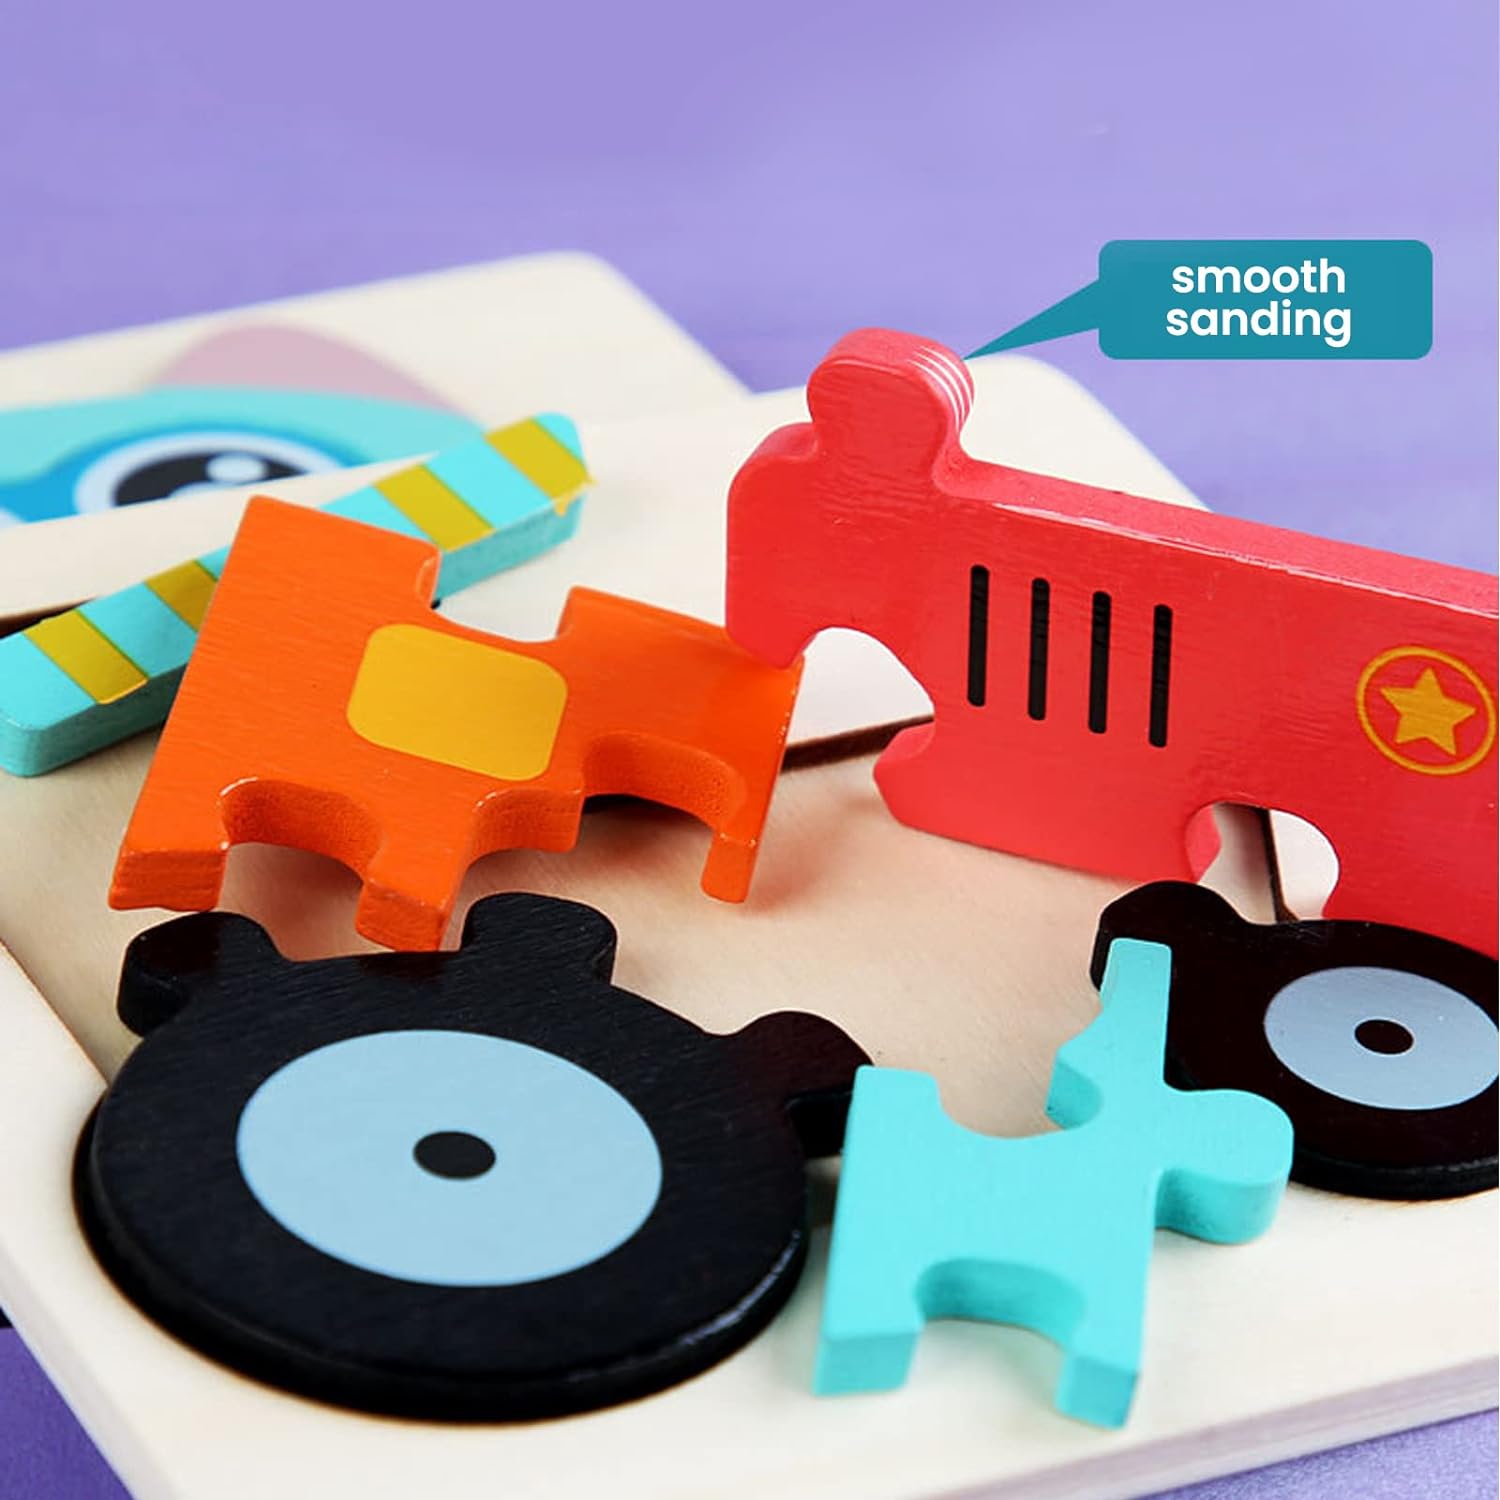 12 Pack Wooden Puzzles Toddler Toys for Kids 1-3 Years Old, Jigsaw Puzzles Learning Toys for Boys and Girls, Montessori Toys Color Shapes Early Learning Educational Gift